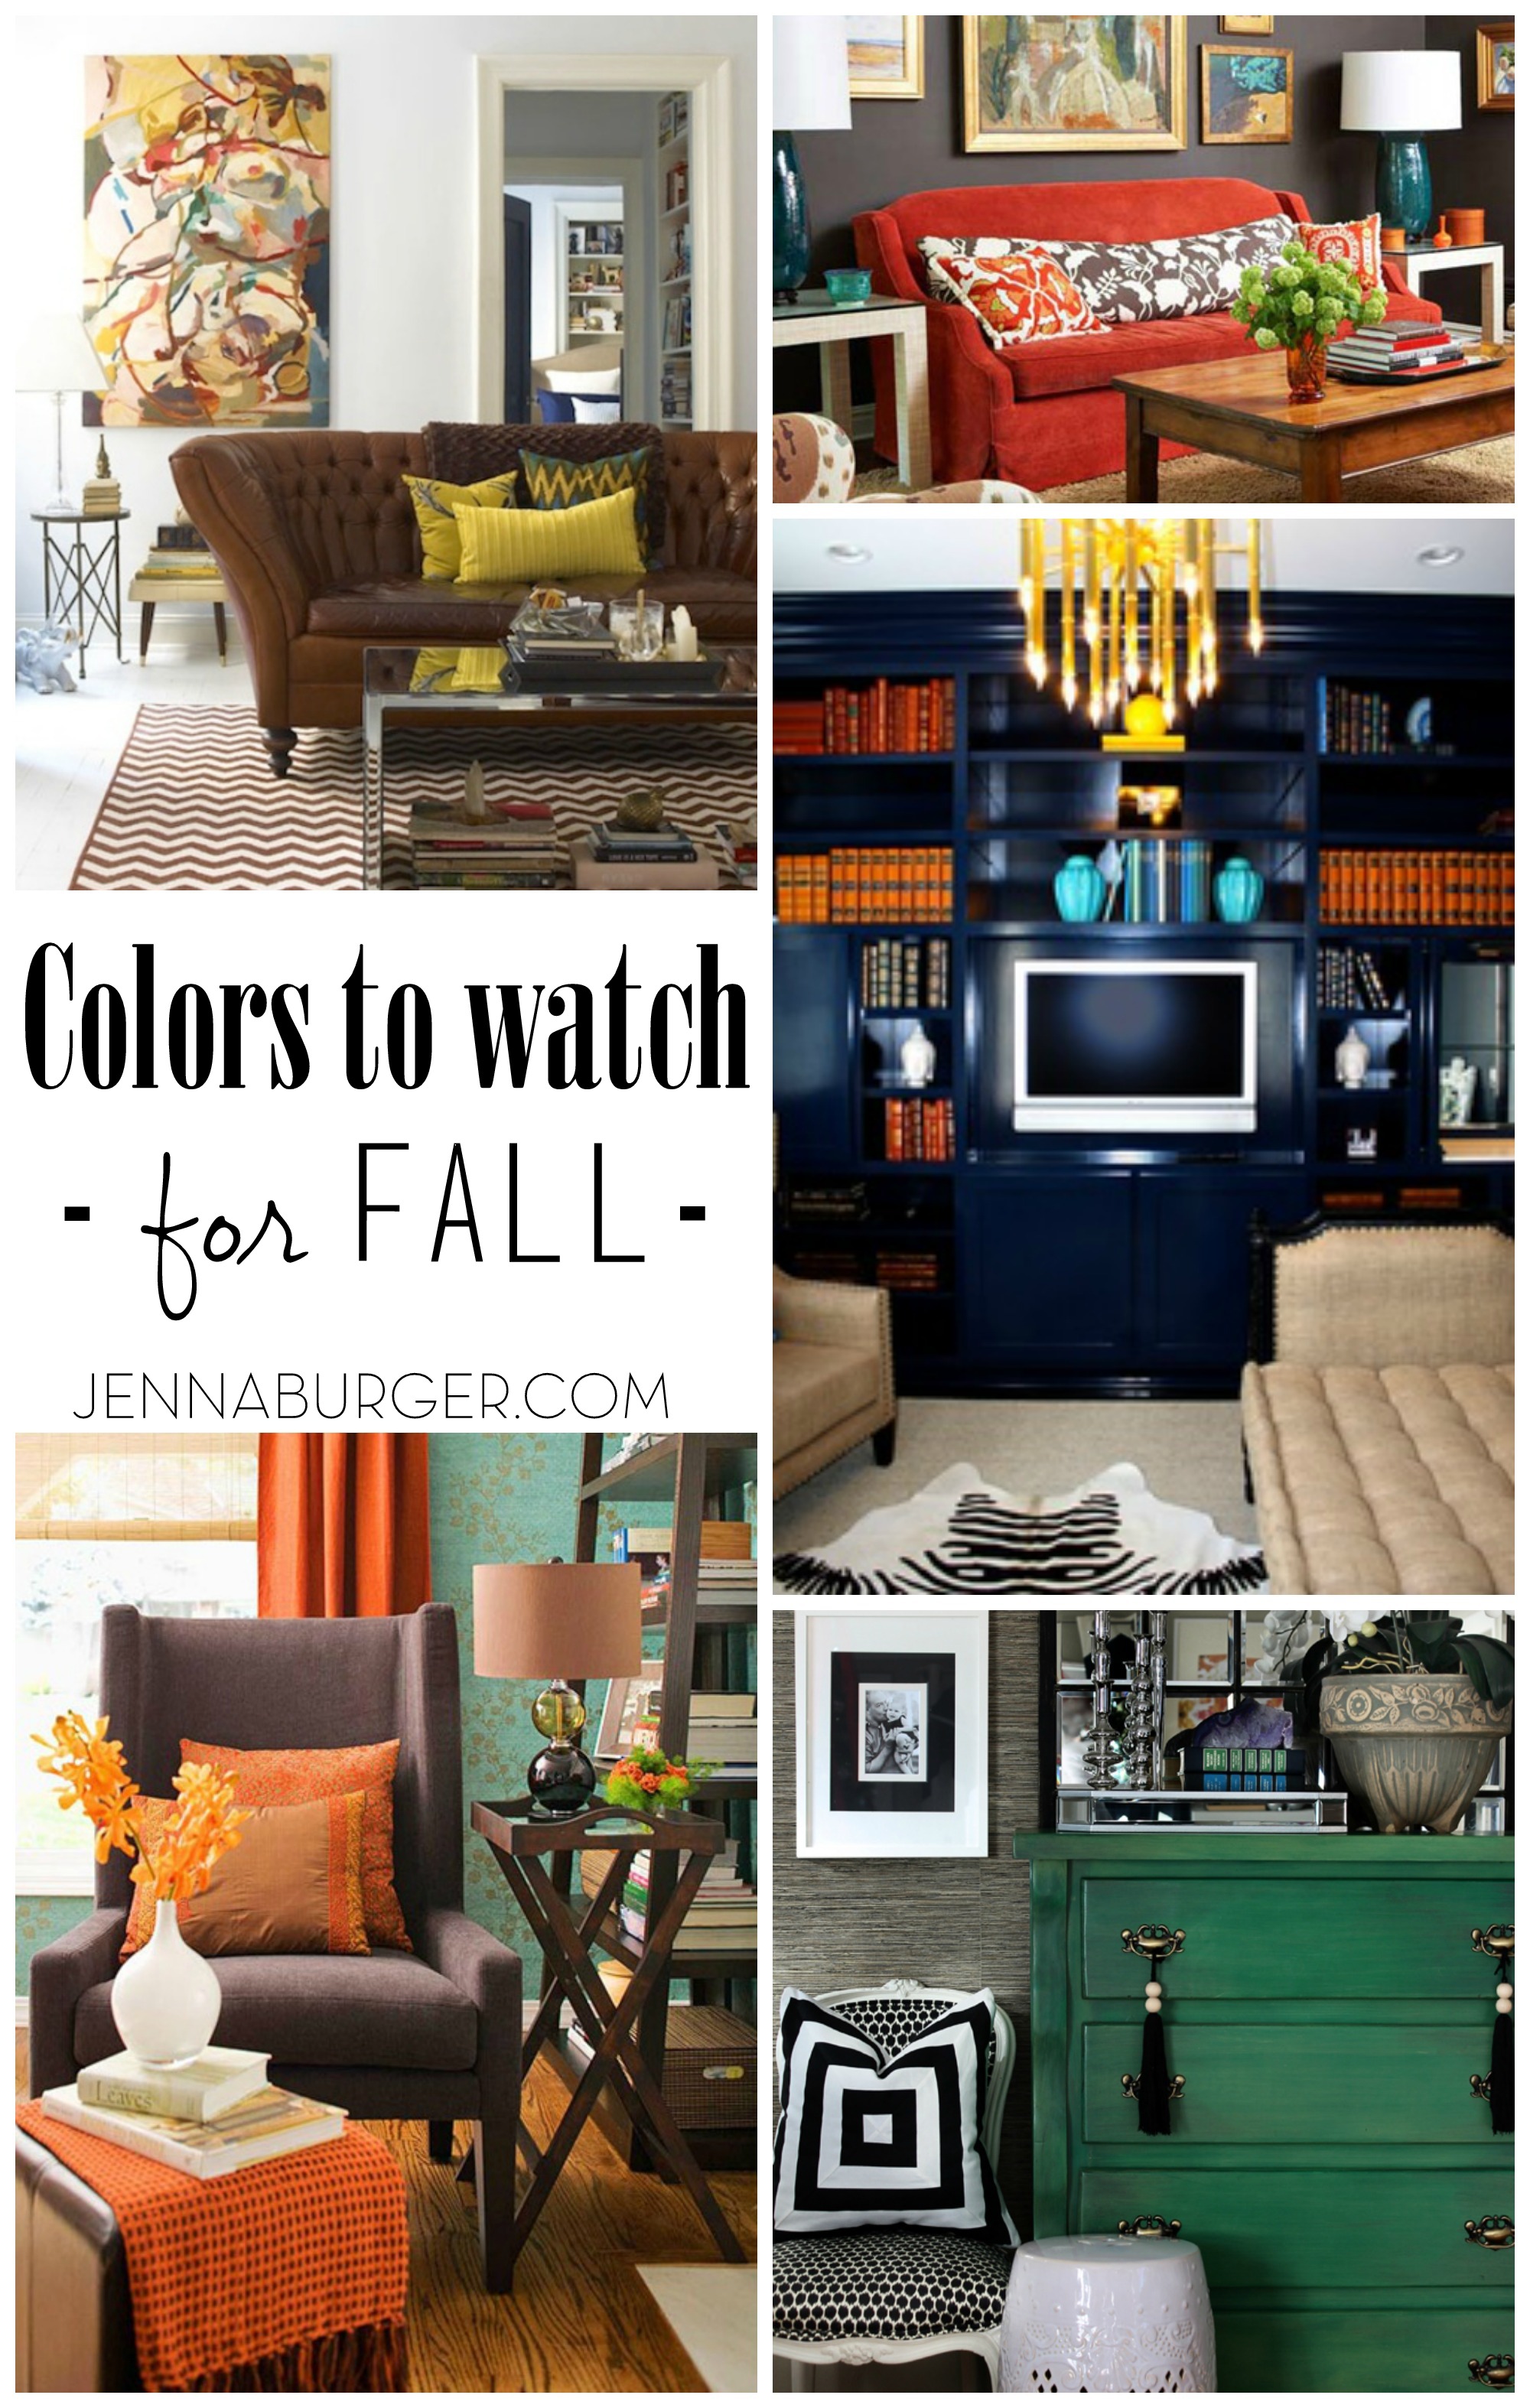 Fall Colors for your Home Decor - Jenna Burger